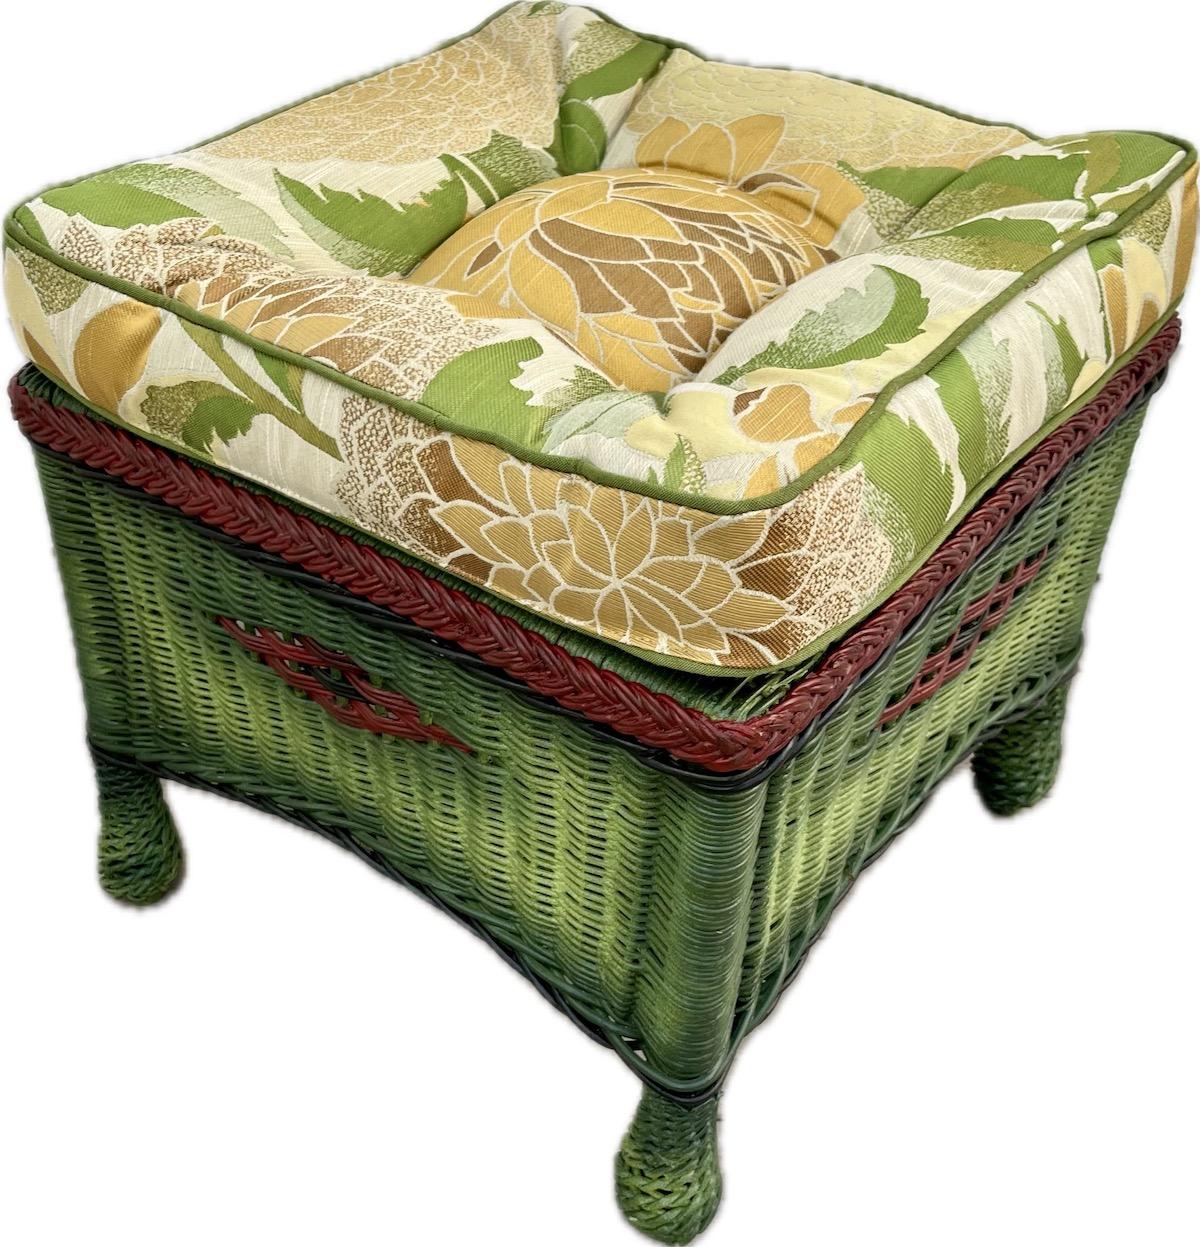 American A Square Wicker Ottoman in French Green Finish with Colored Accents For Sale